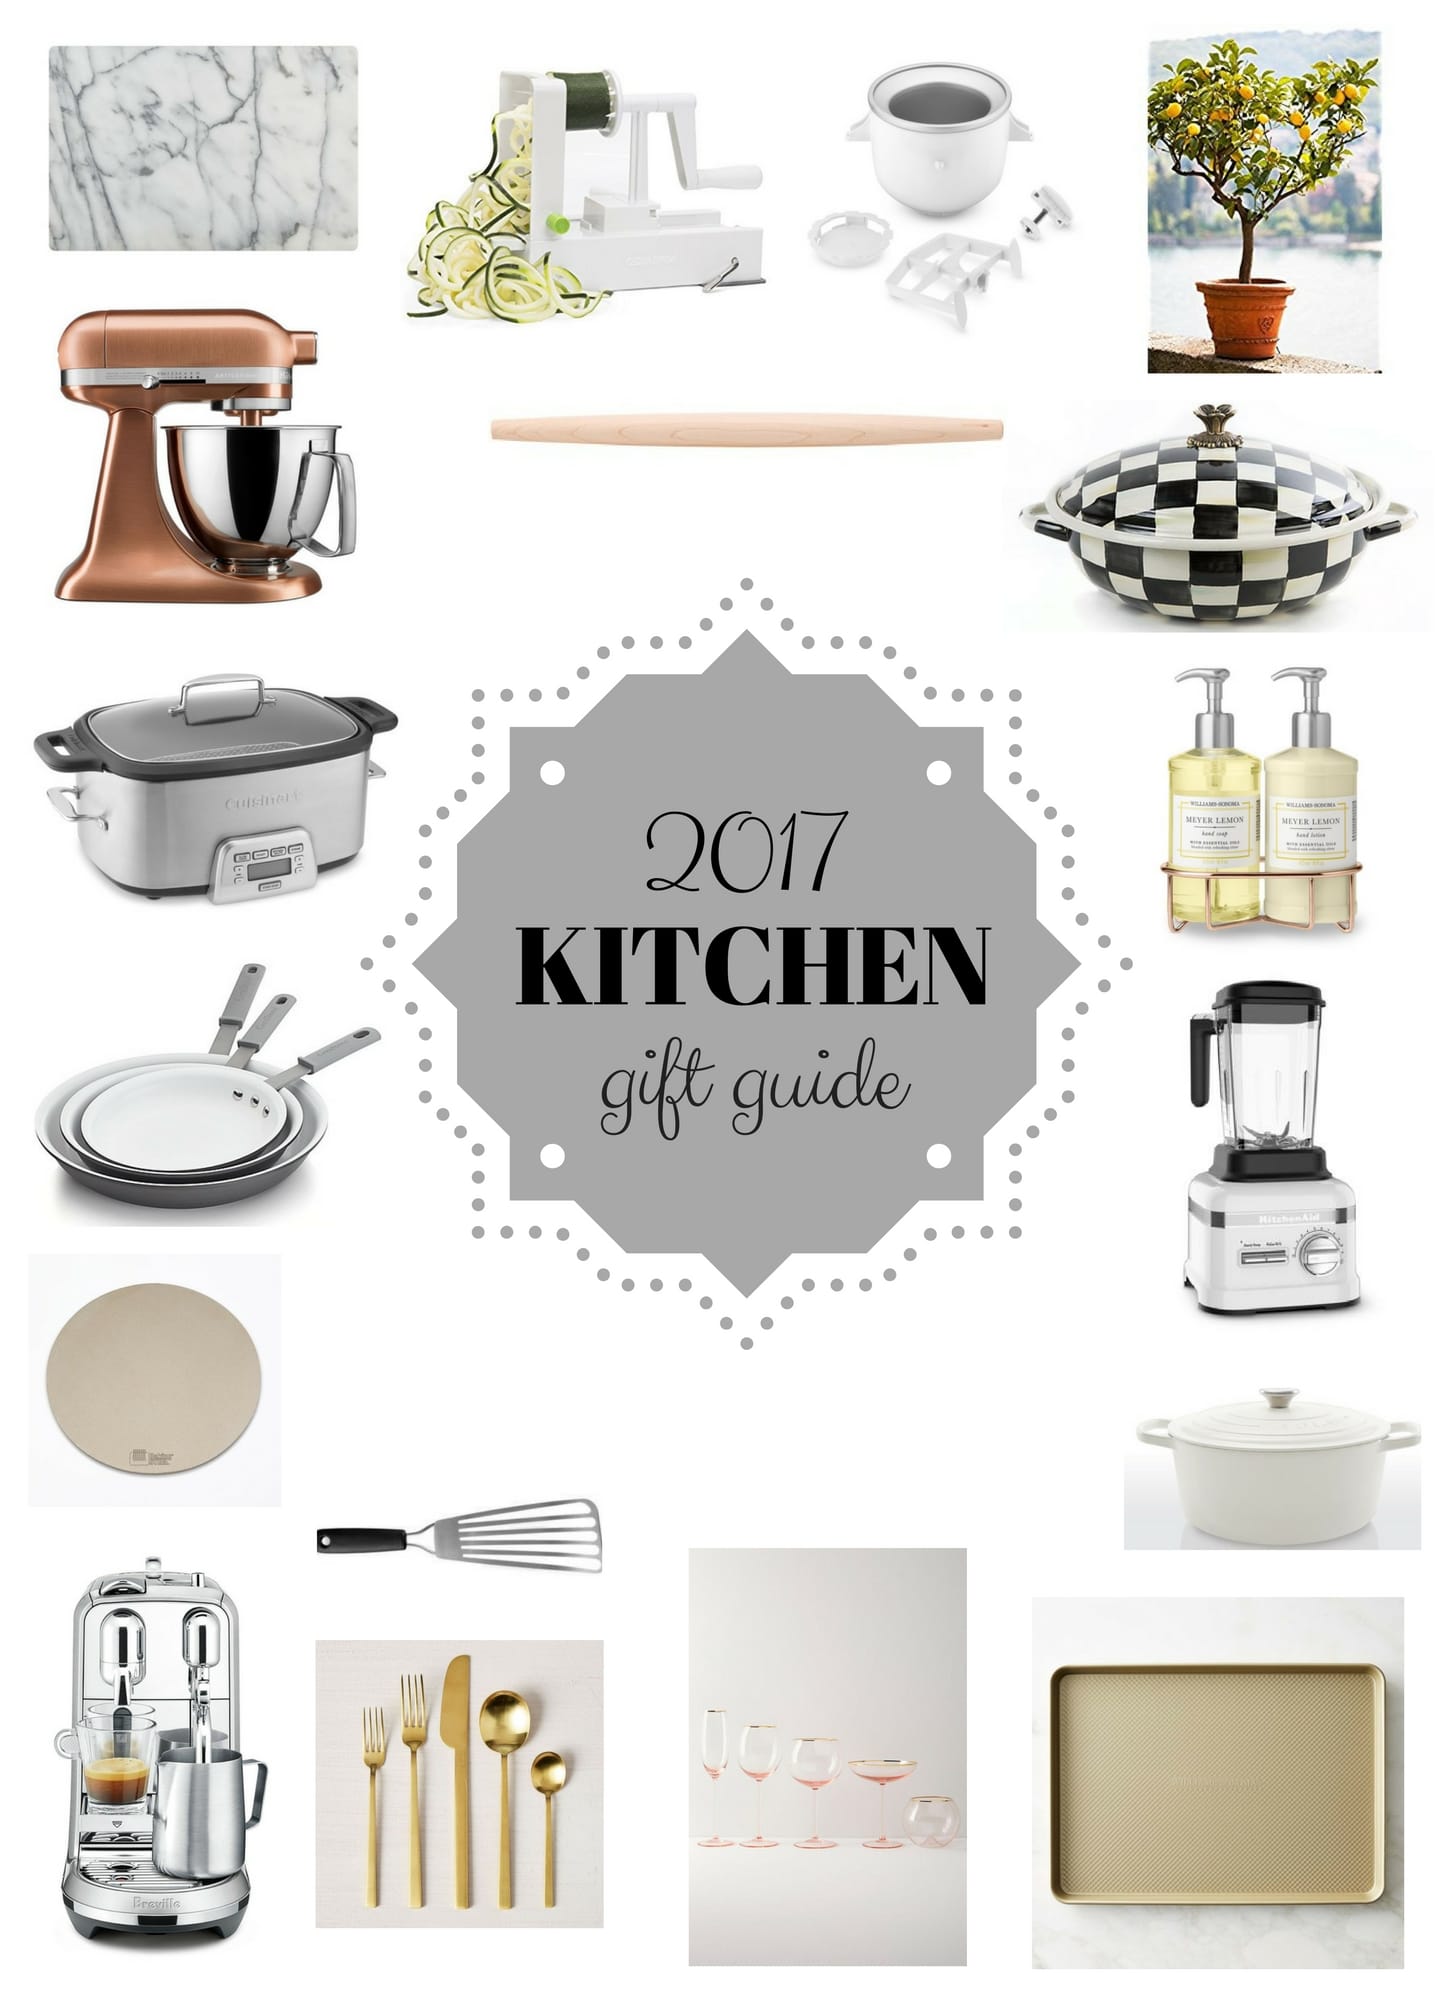 2017 kitchen gift guide I howsweeteats.com